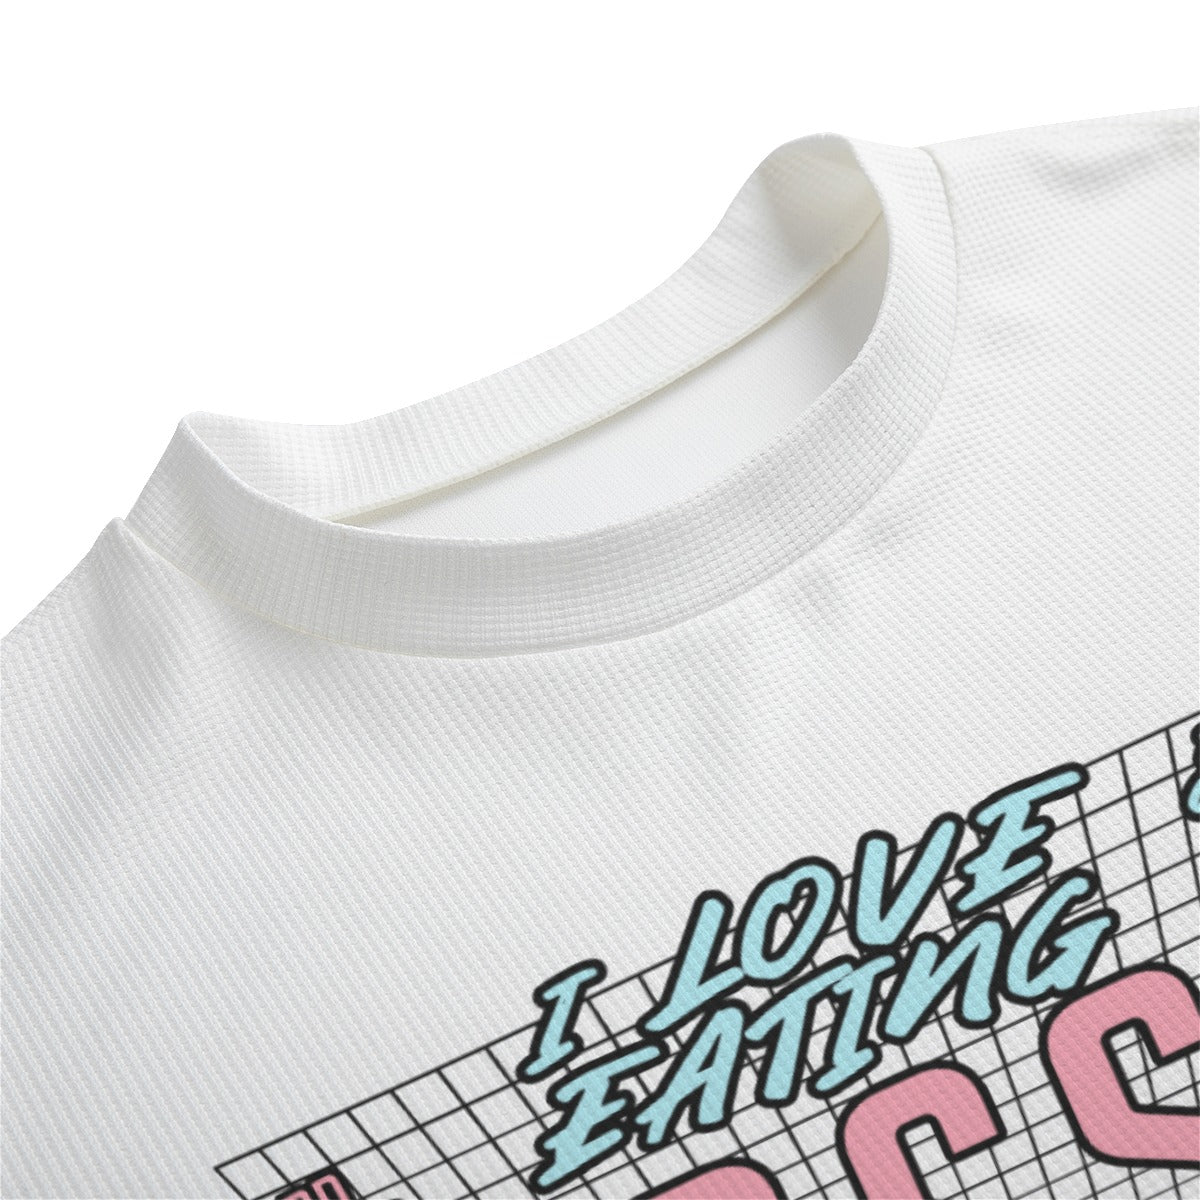 "I LOVE EATING junk food AND playing CLASSIC games" Unisex Drop-shoulder T-shirt